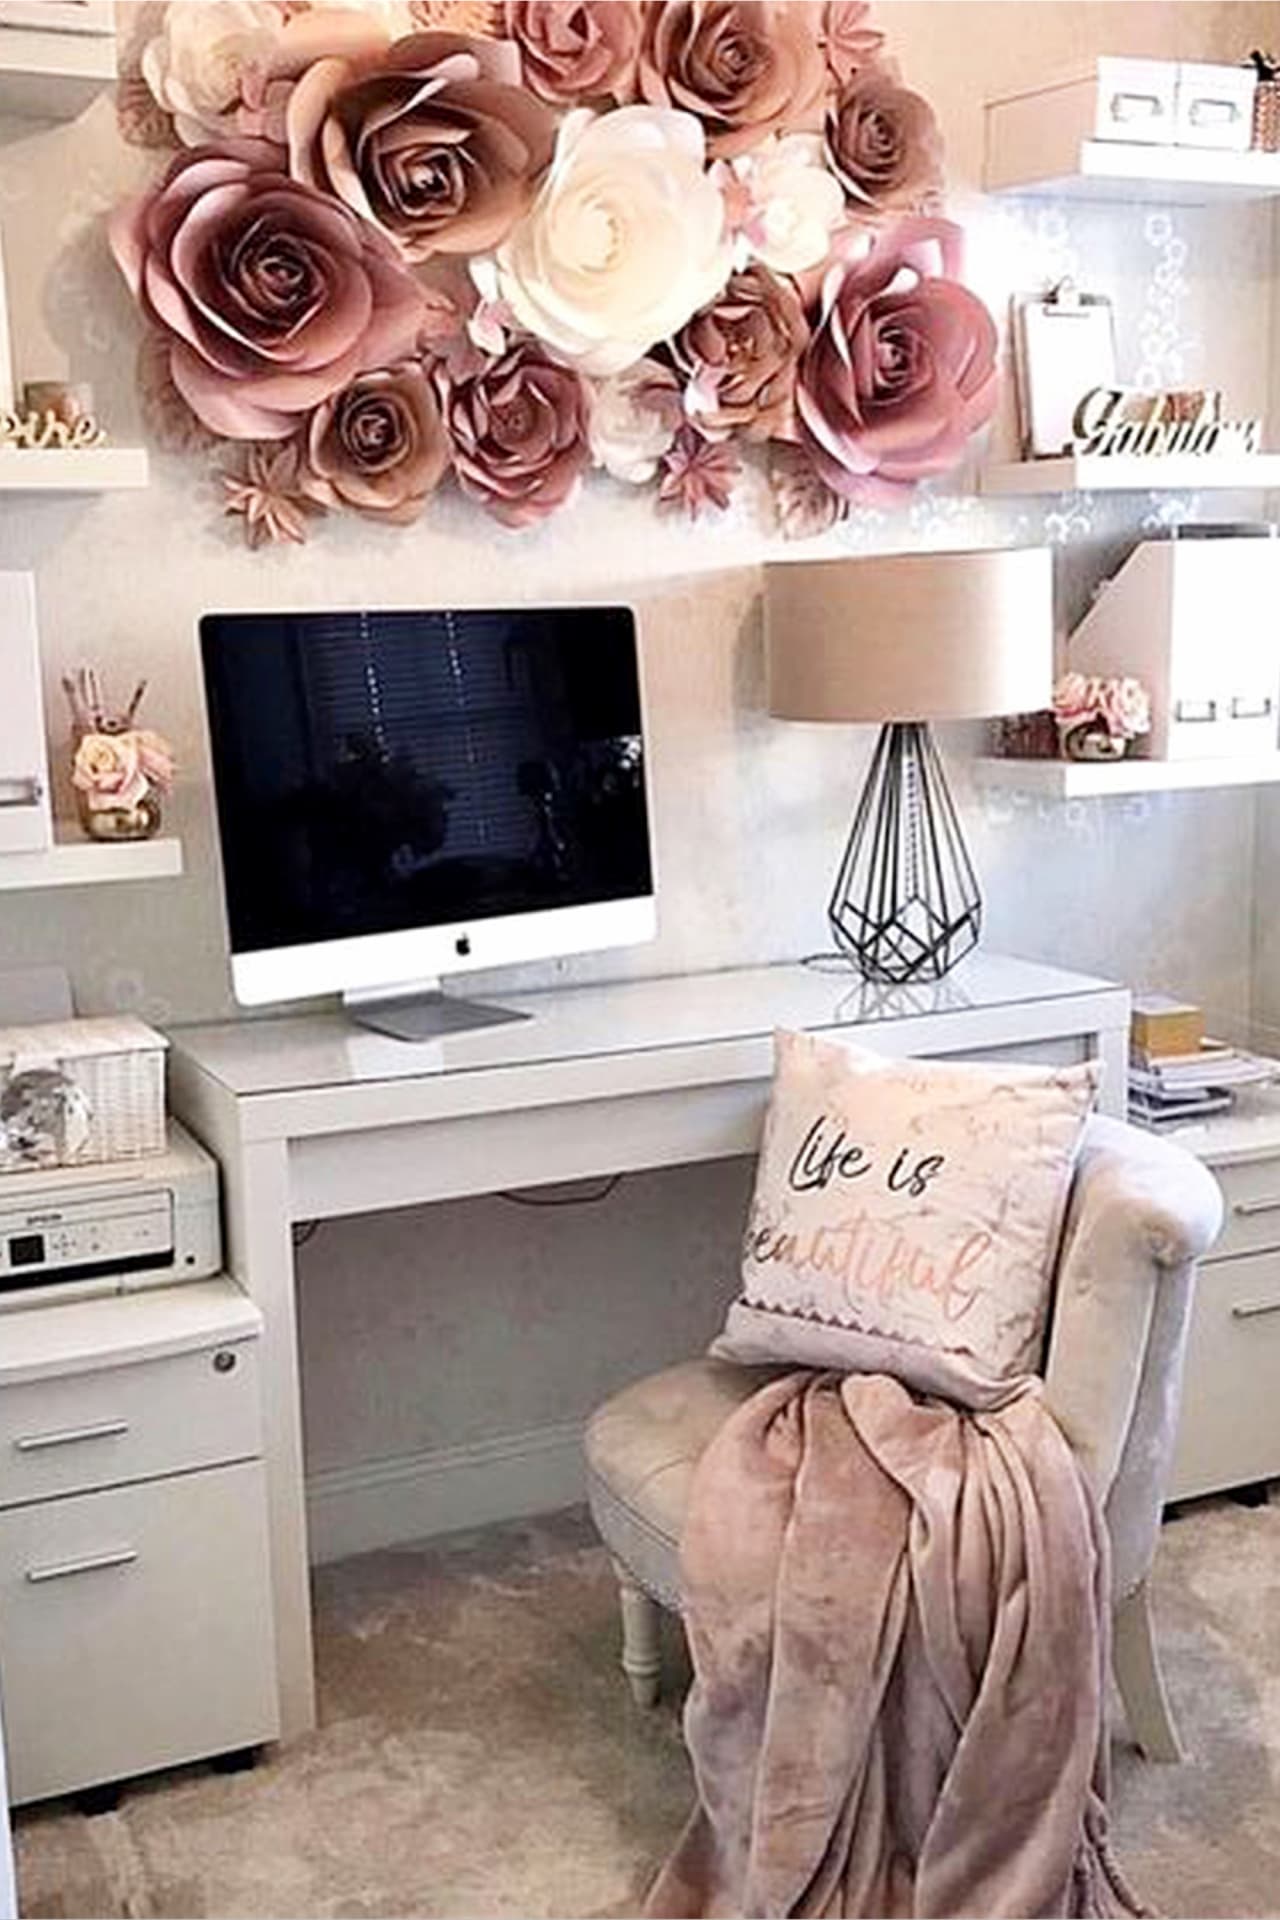 Pretty and feminine home office ideas for women and Girl Bosses!  Work from home?  You NEED a beautiful workspace to spark your creativity.  The rose gold /dusty rose home office decor accents are gorgeous!